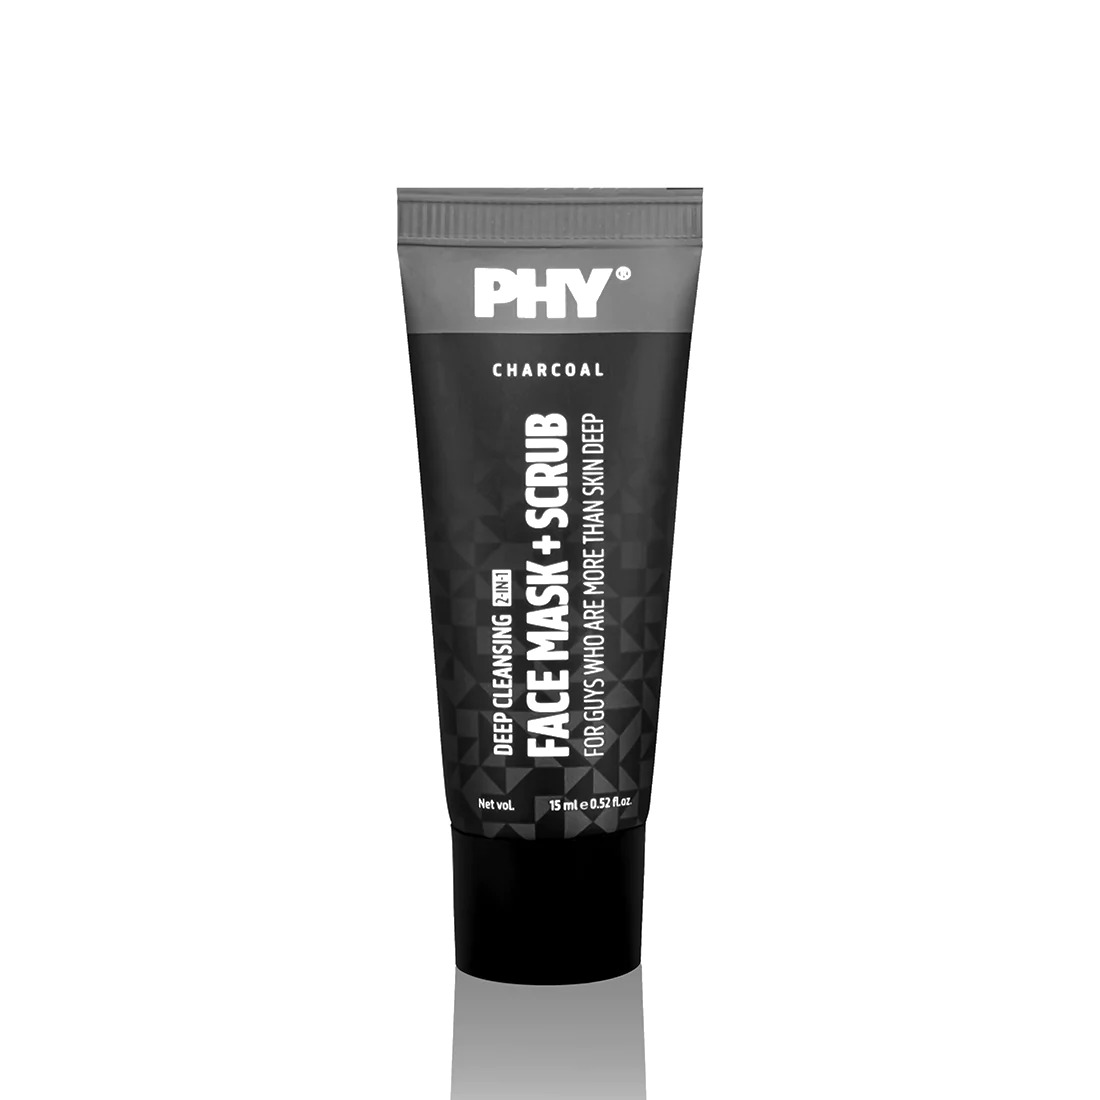 Phy Charcoal 2-in-1 Face Mask + Scrub